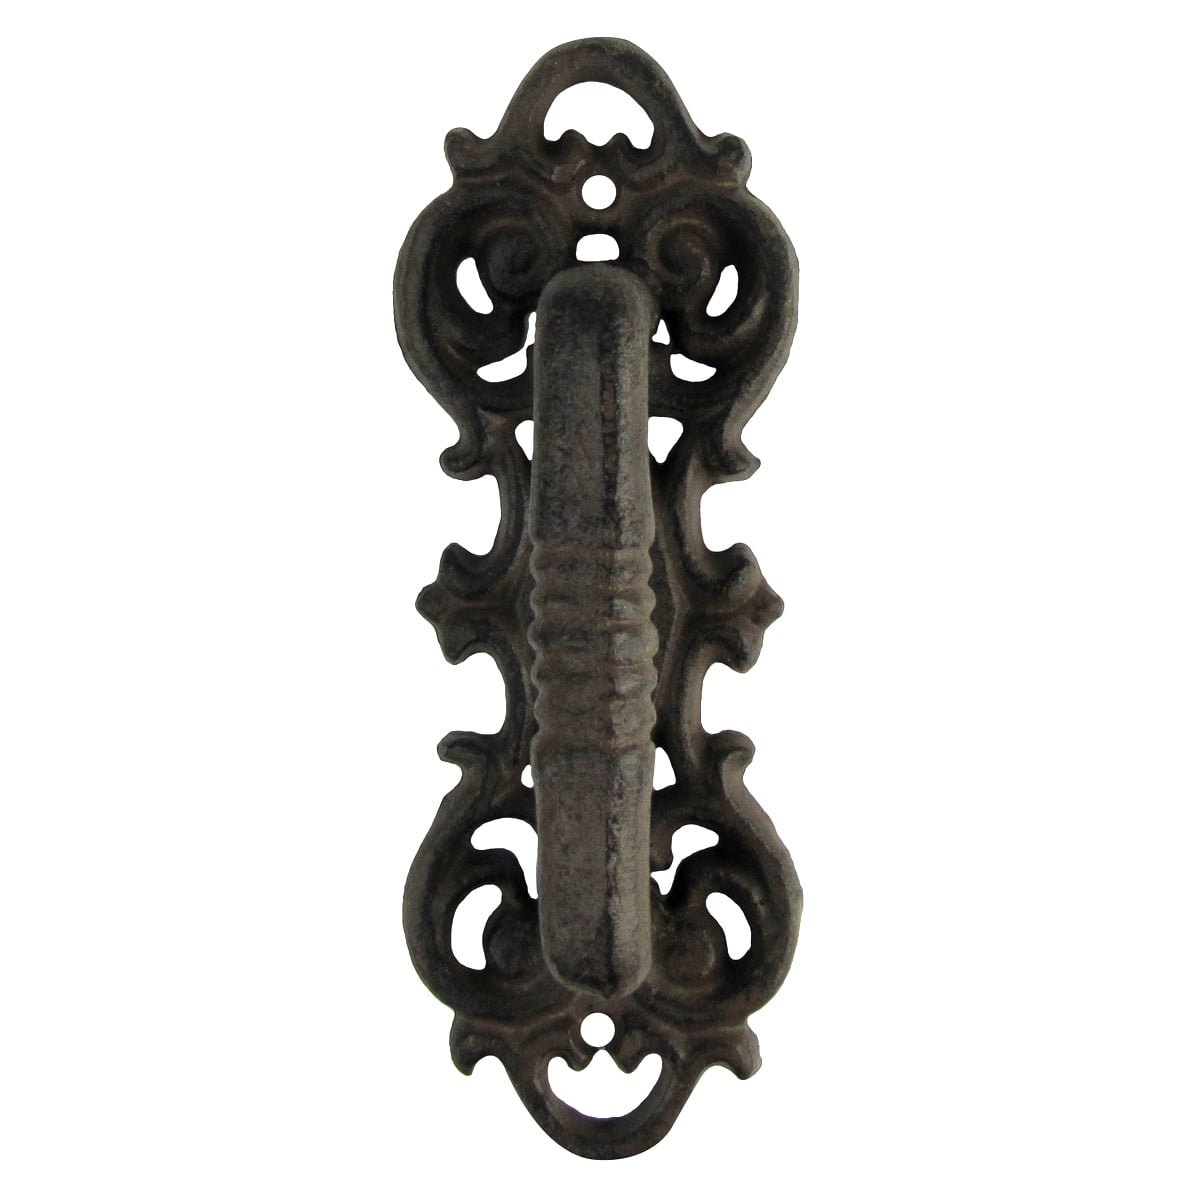 6 Large Cast Iron Antique Style FANCY Barn Handle Shed Door Handles Gate Pull